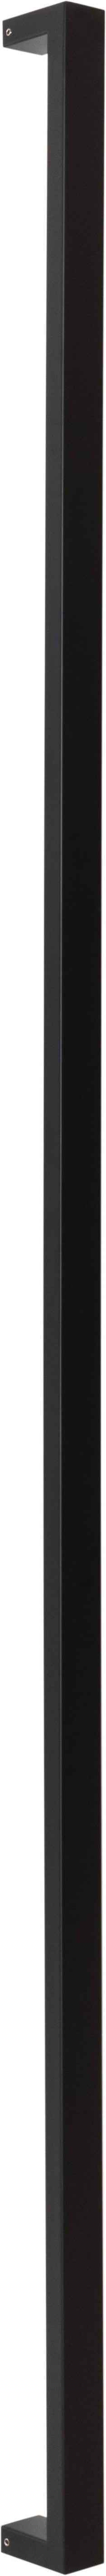 Sure-Loc 48" Square Long Door Pull, Single-Sided in Flat Black finish